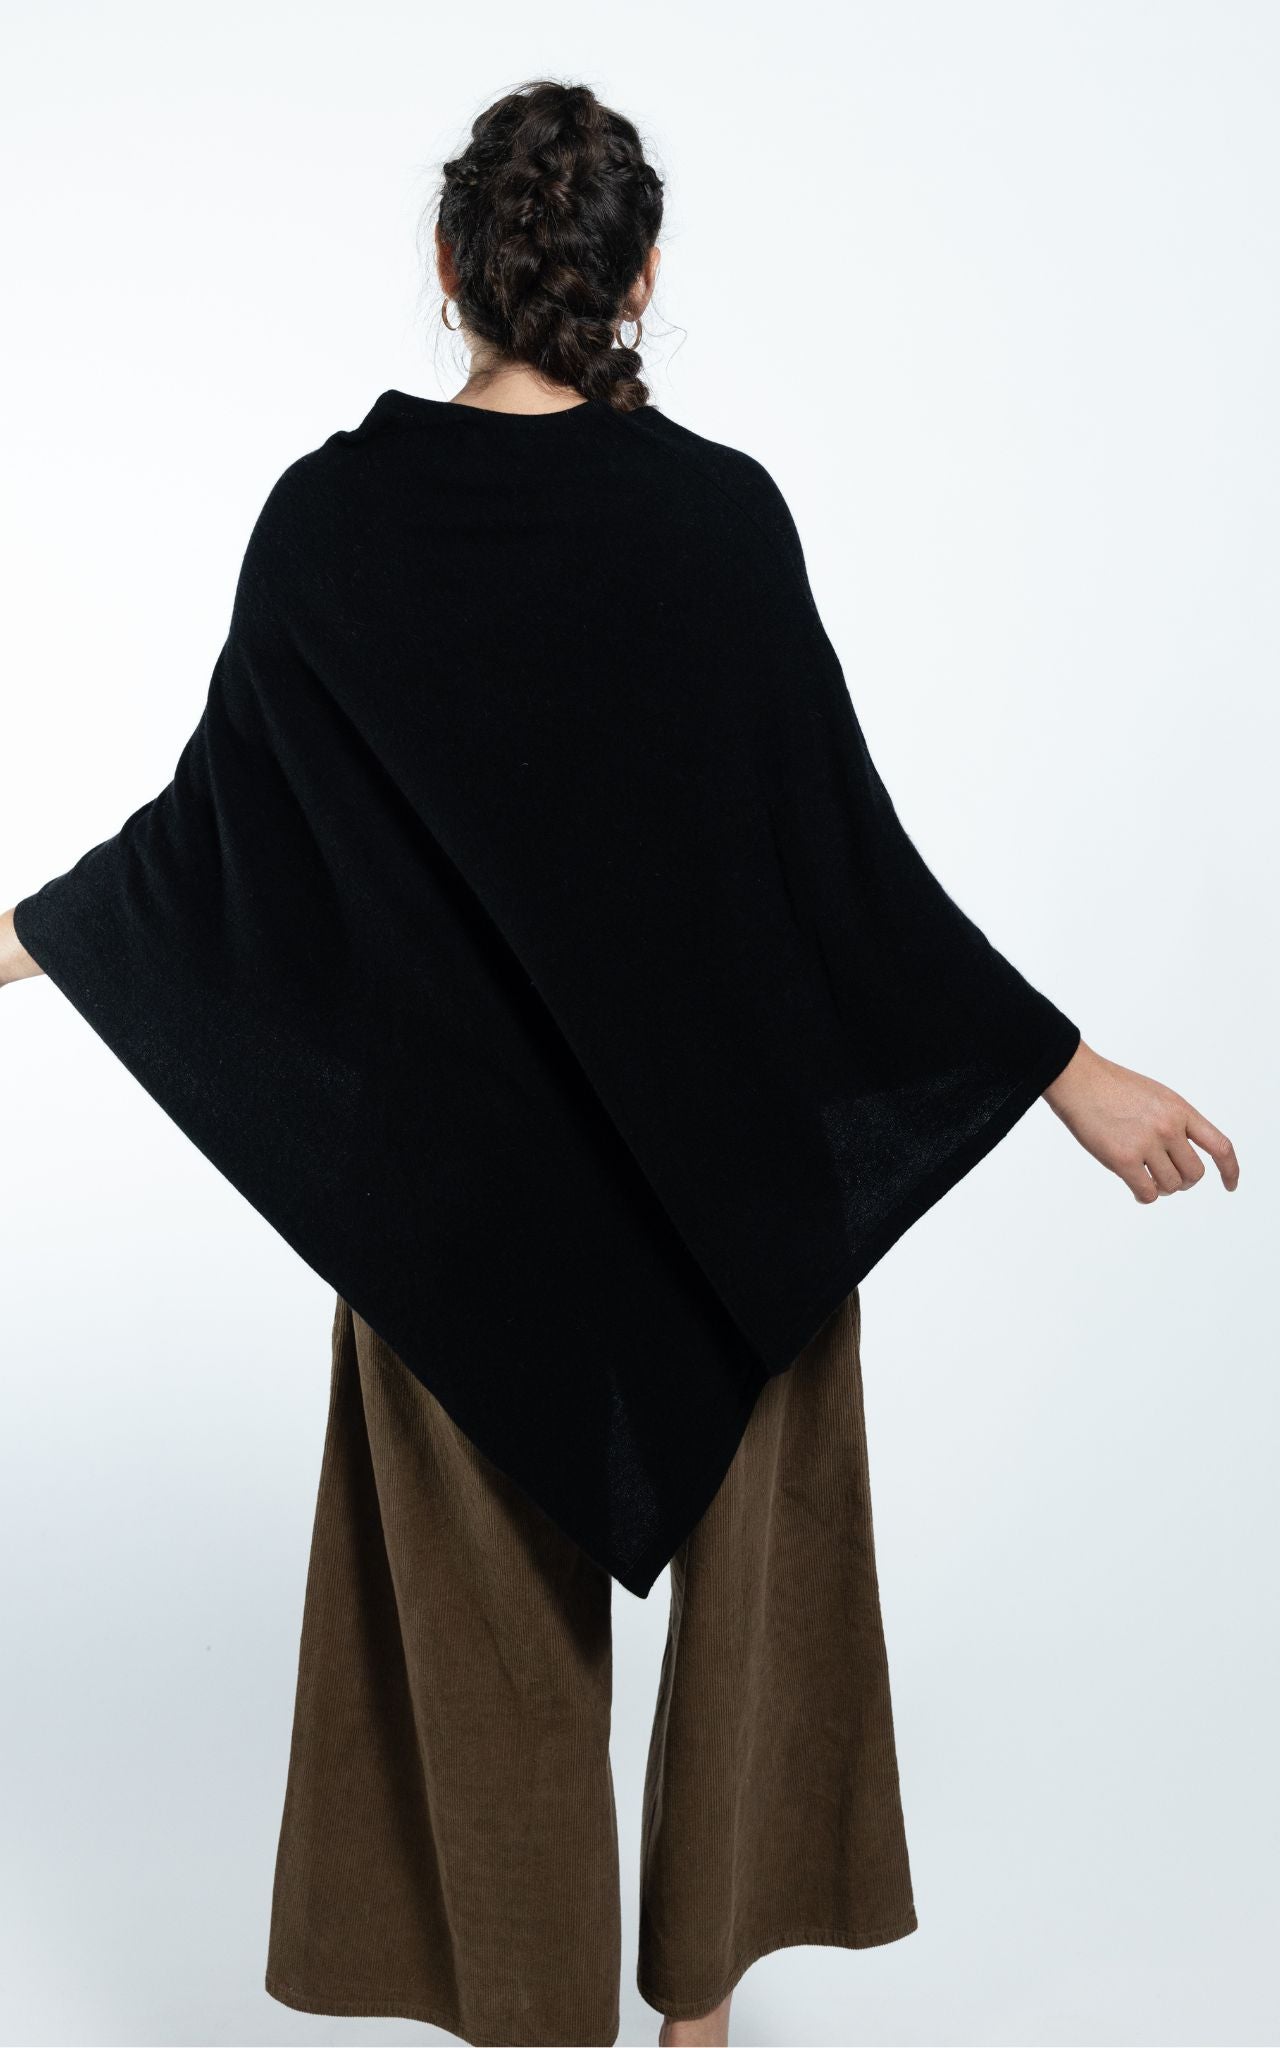 Surya Australia Ethical Cashmere Poncho made in Nepal - Black